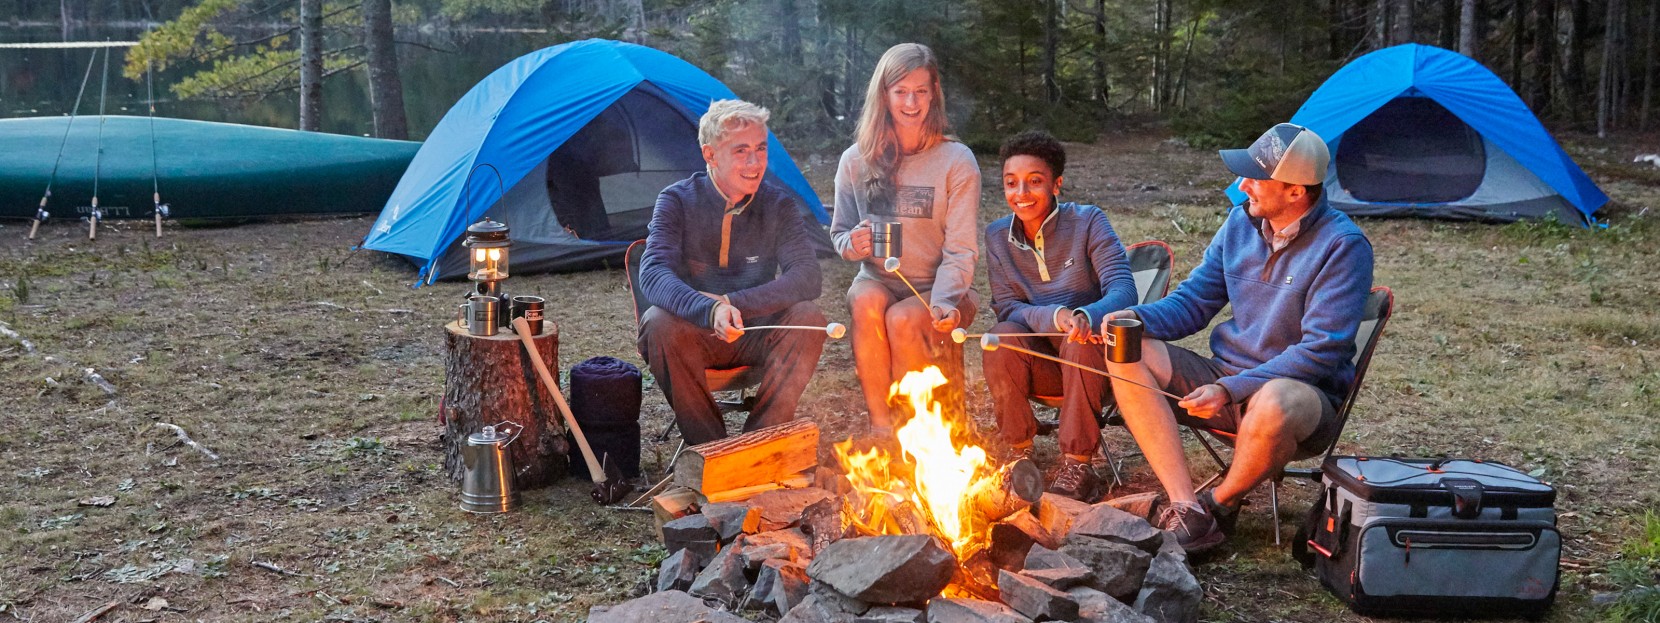 A family sitting around a campfire, tents in the background.